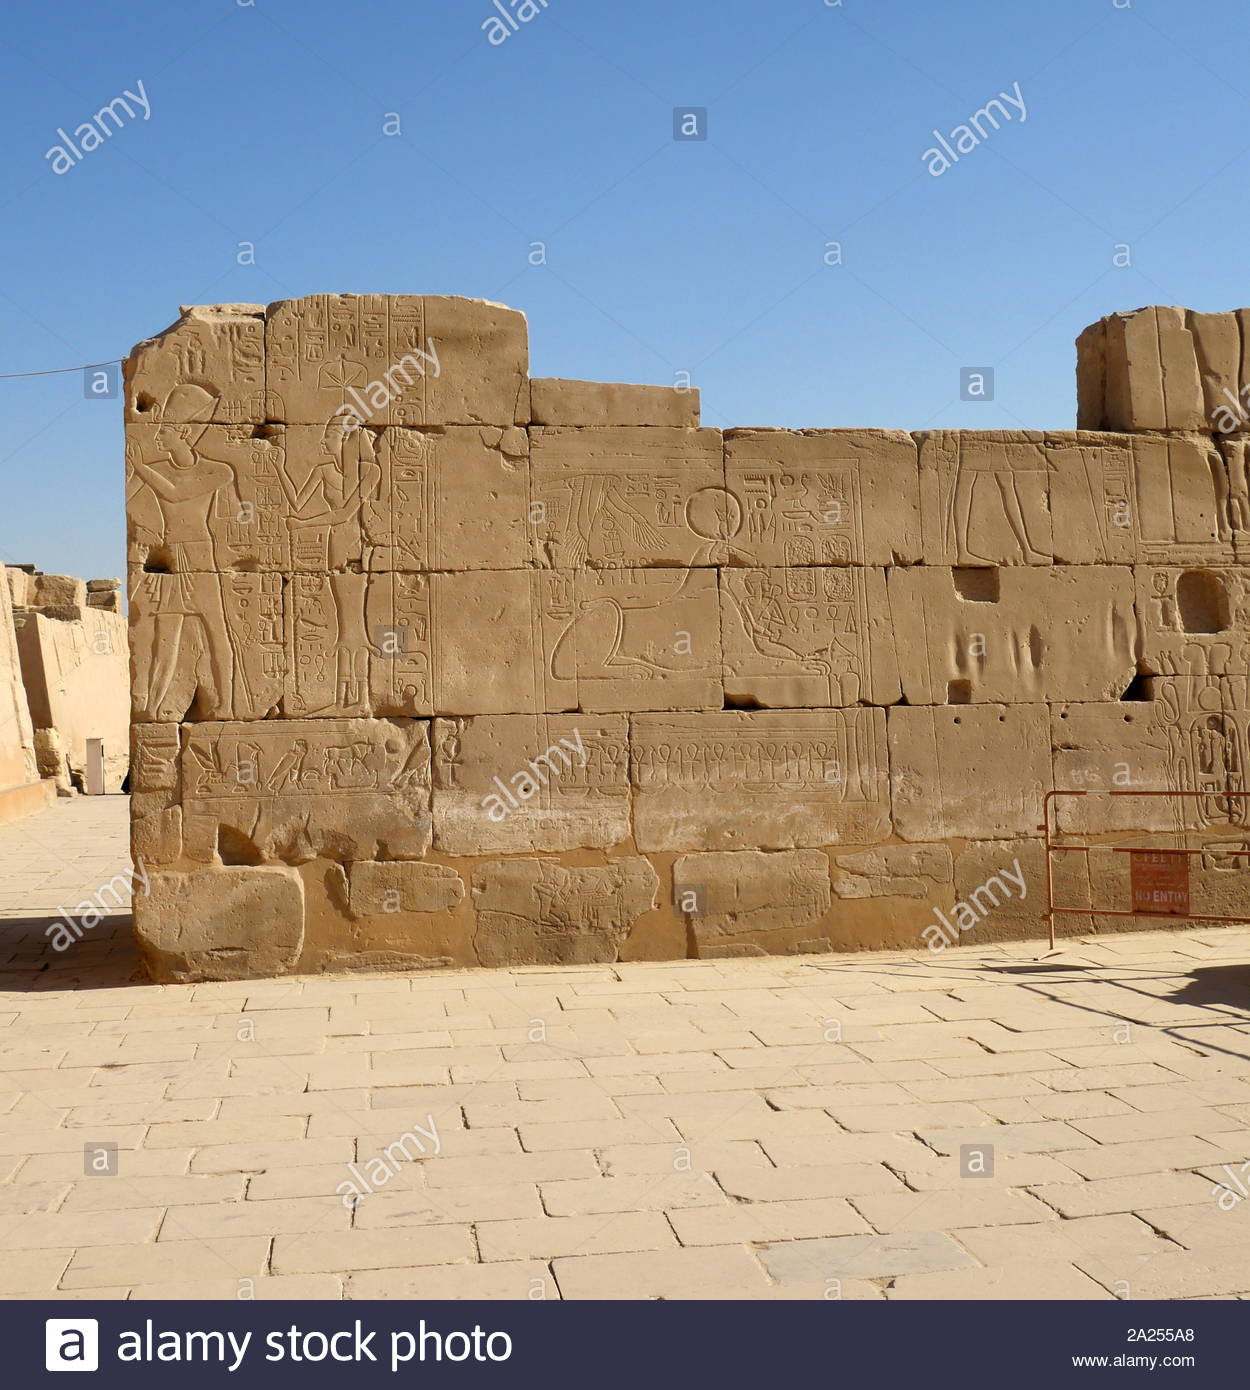 Relief depicting a king and queen and the Ram headed god Khnum at Karnak Temple Complex, in Luxor, Egypt. Construction at the complex began during the reign of Senusret I in the Middle Kingdom and continued into the Ptolemaic period, although most of the extant buildings date from the New Kingdom. The area around Karnak was the main place of worship of the eighteenth dynasty Theban Triad with the god Amun as its head. It is part of the monumental city of Thebes. Stock Photo